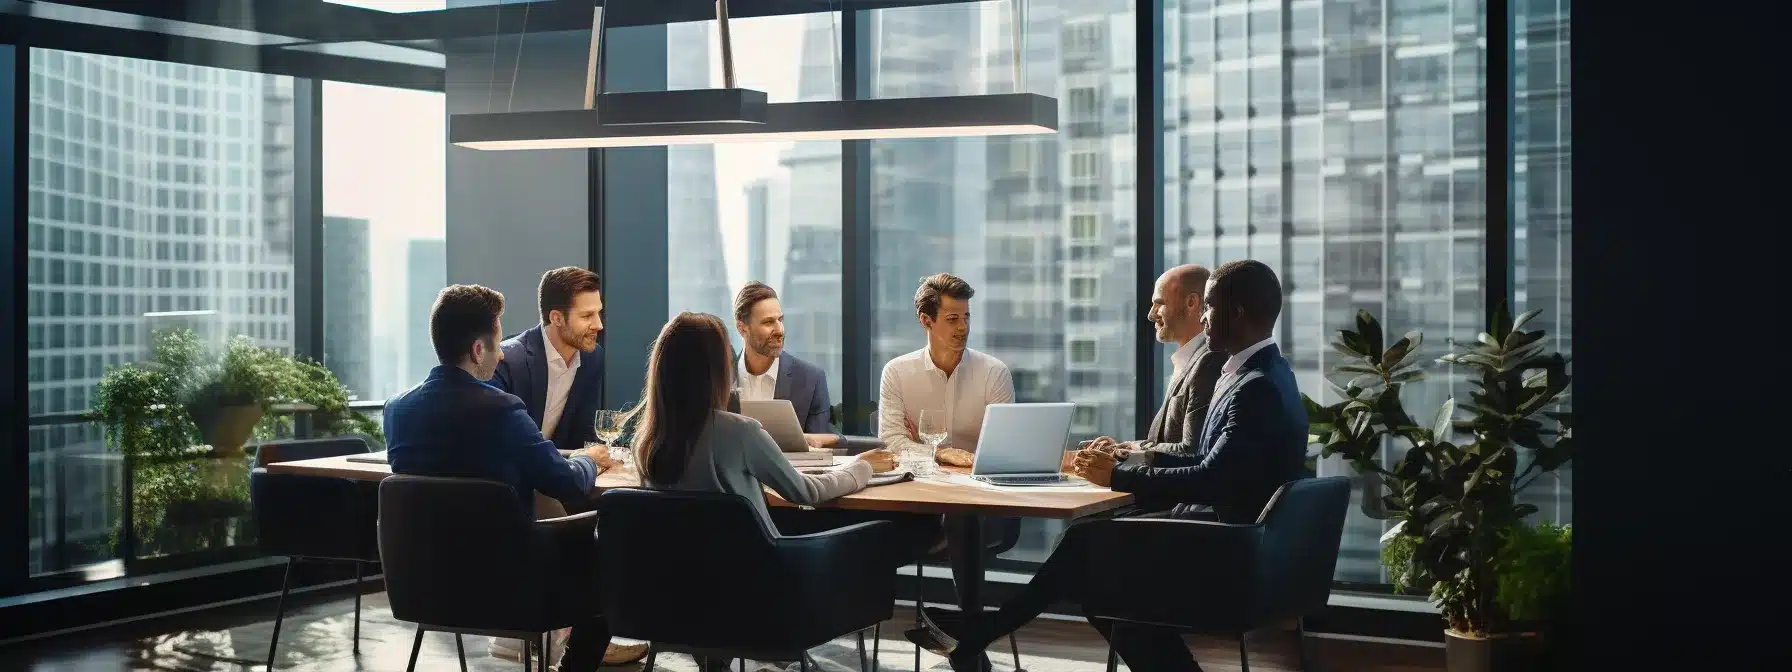 A Group Of Executives Discussing Brand Safety Strategies In A Sleek Modern Office Space.